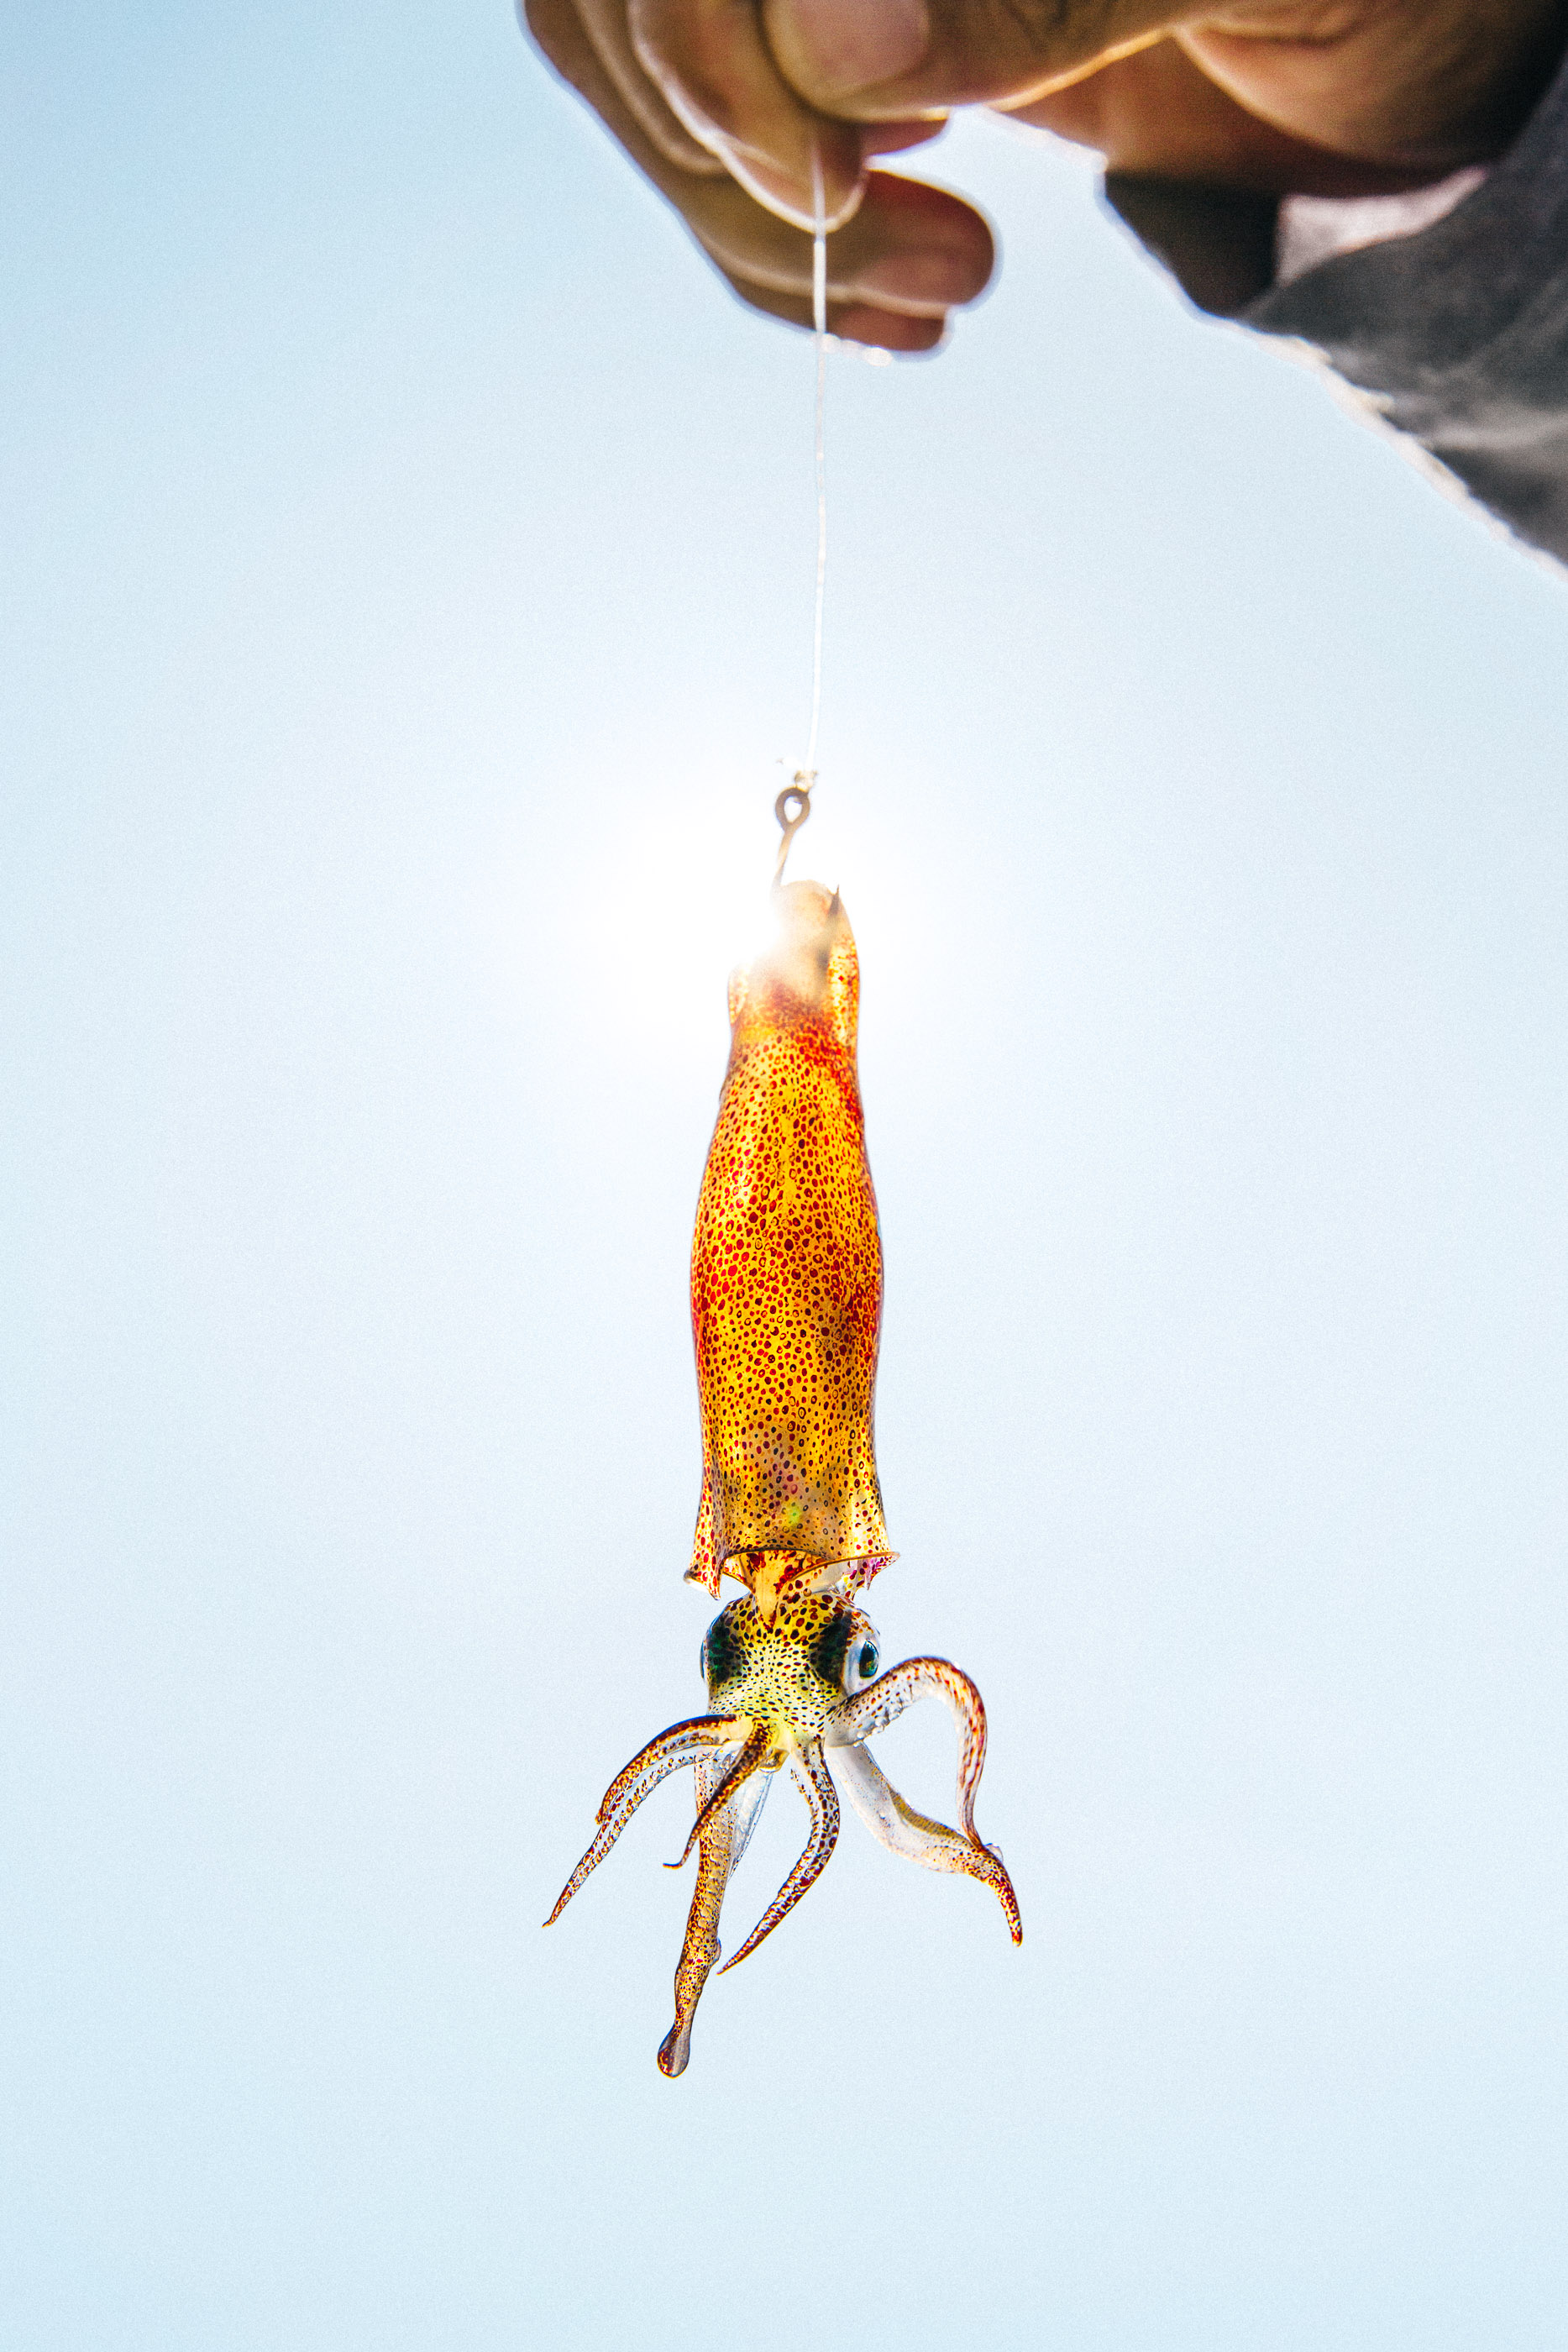 Squid bait dangles from a hook